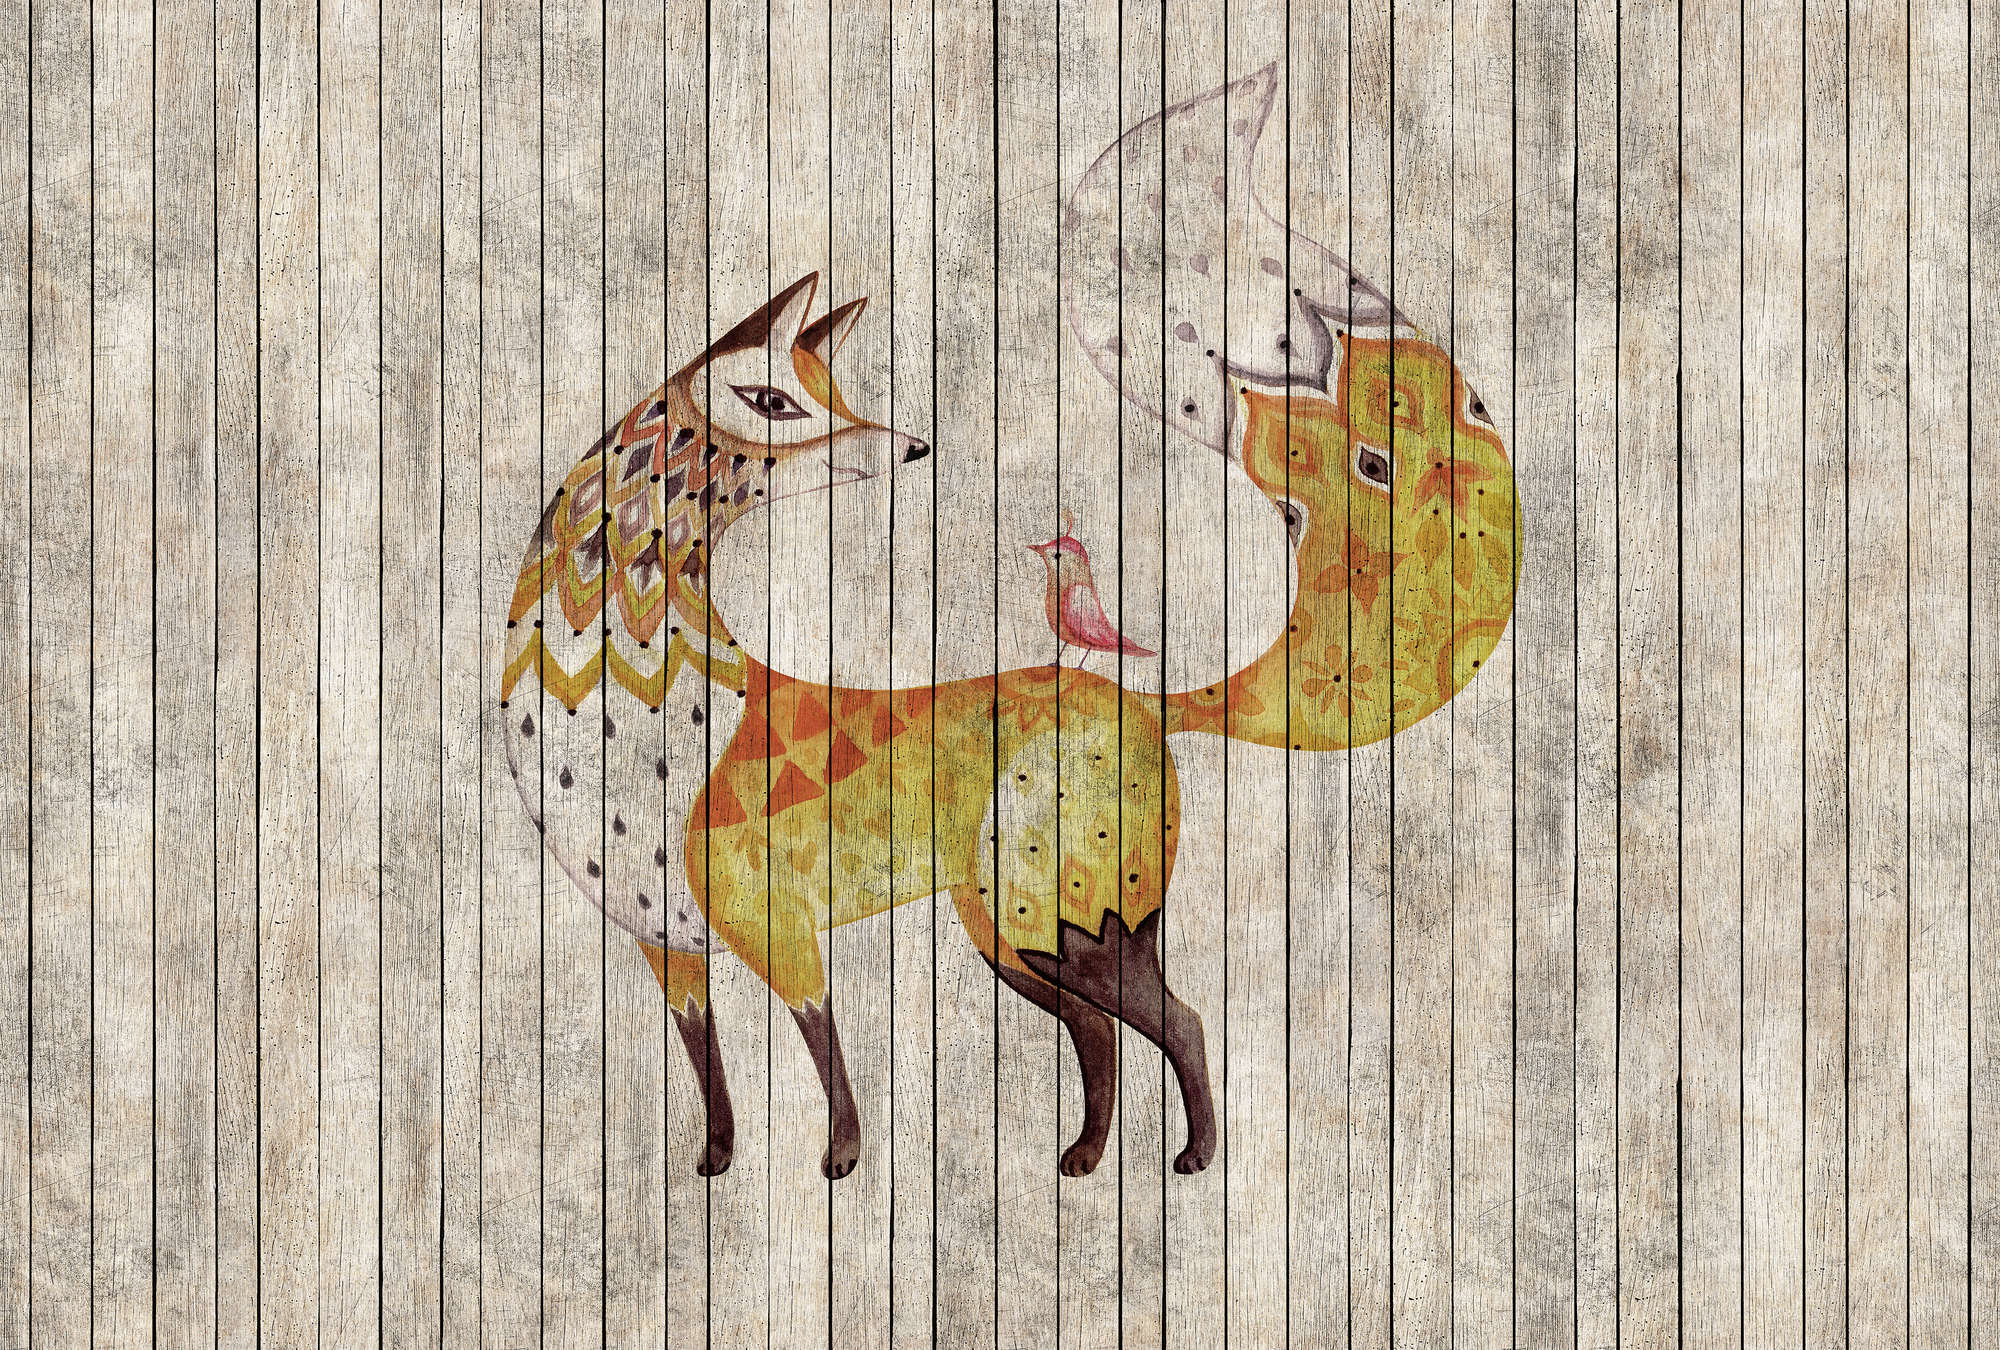             Fairy tale 2 - Fox and Bird on Wood Optic Wallpaper - Beige, Brown | Premium Smooth Non-woven
        